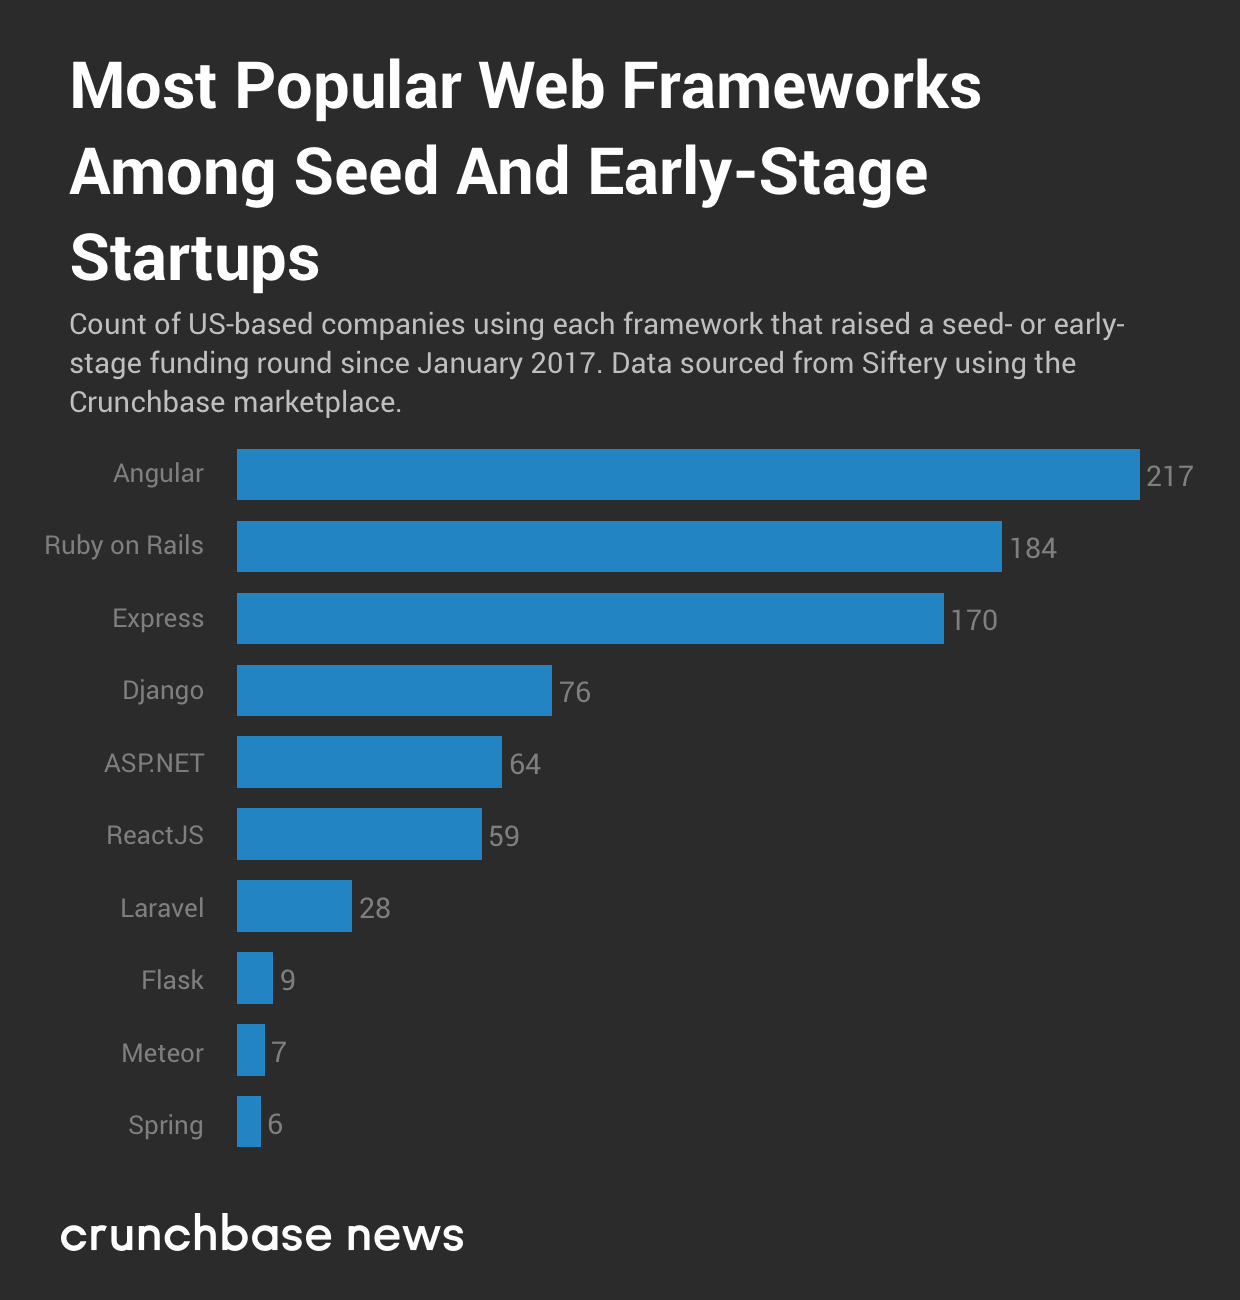 Here Are The Most Popular Web Frameworks With Seed And EarlyStage Startups